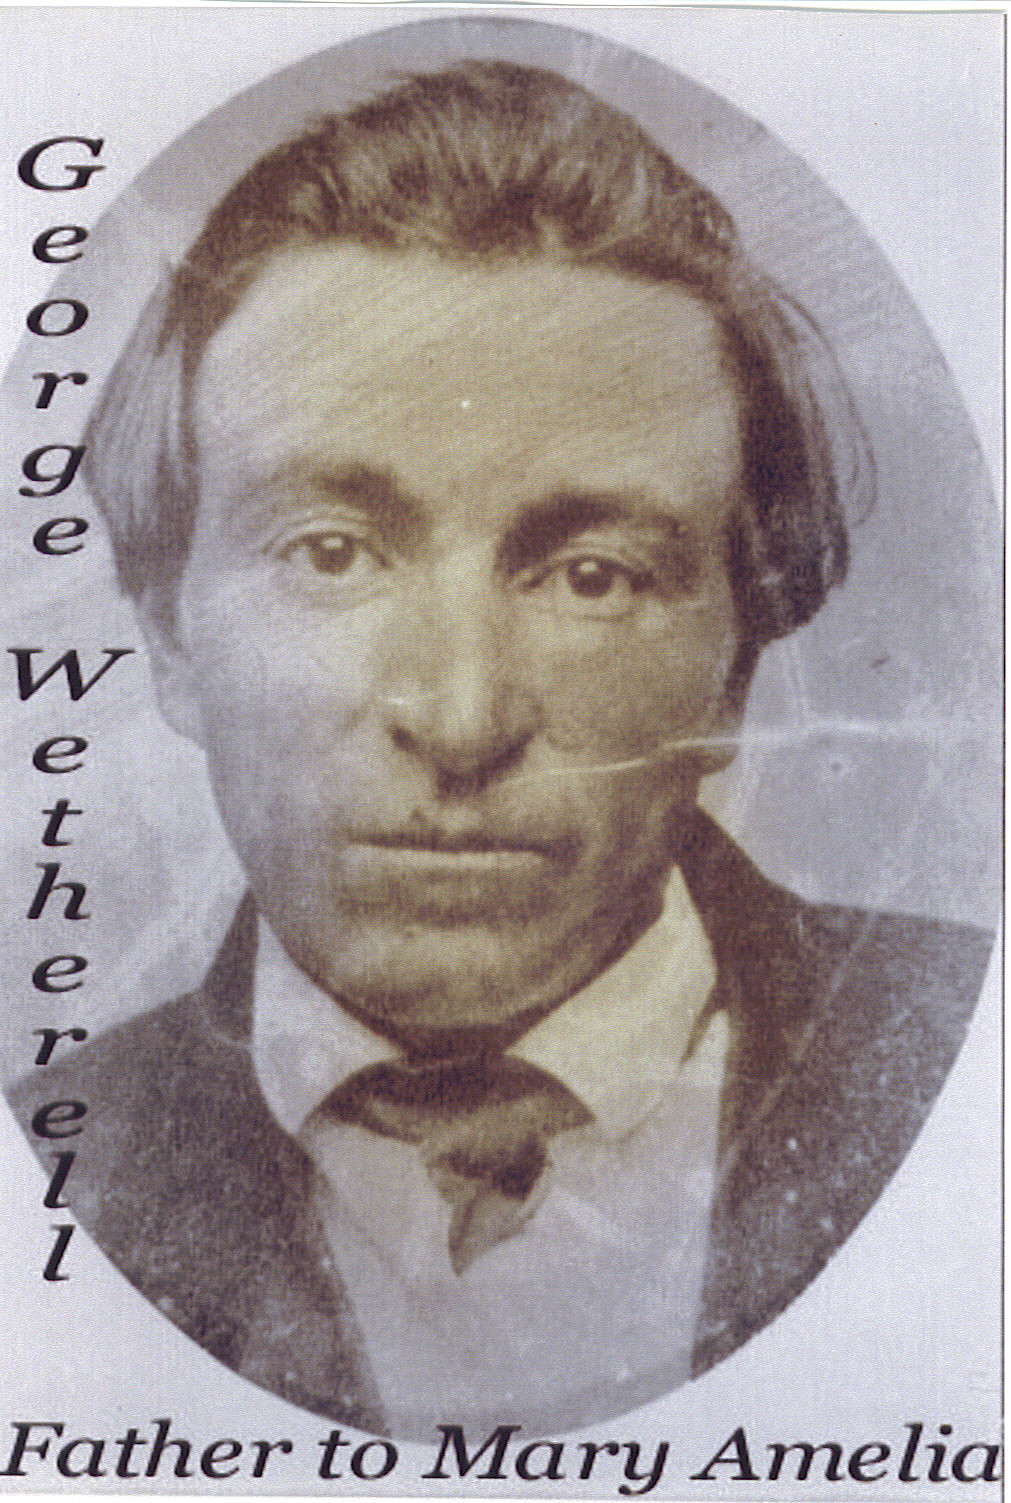 Photo of George H. Wetherell